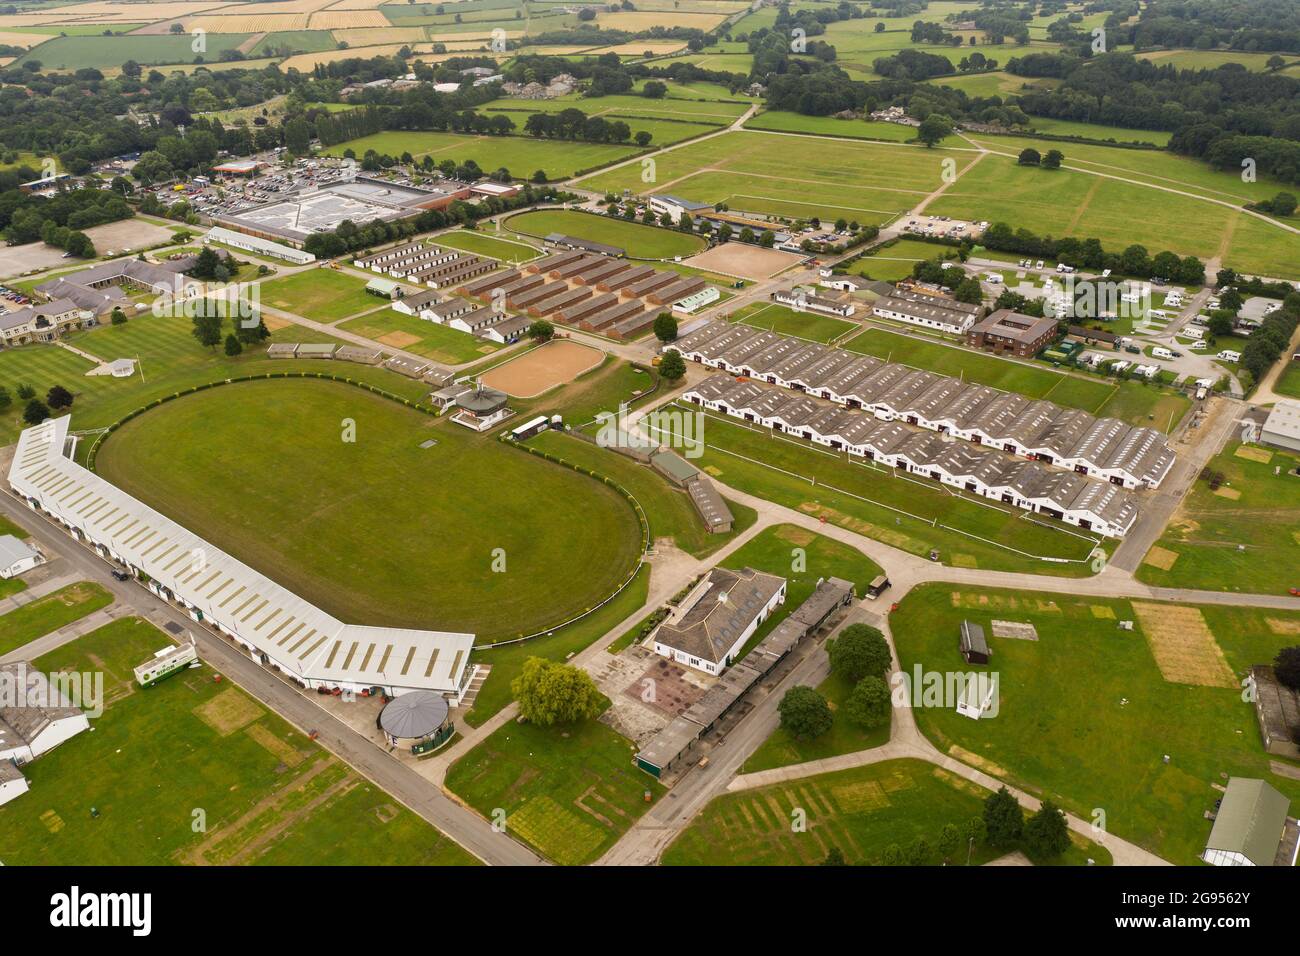 HARROGATE, UK - JULY 23, 2021.  An aerial view of the Great Yorkshire Showground in Harrogate, North Yorkshire Stock Photo